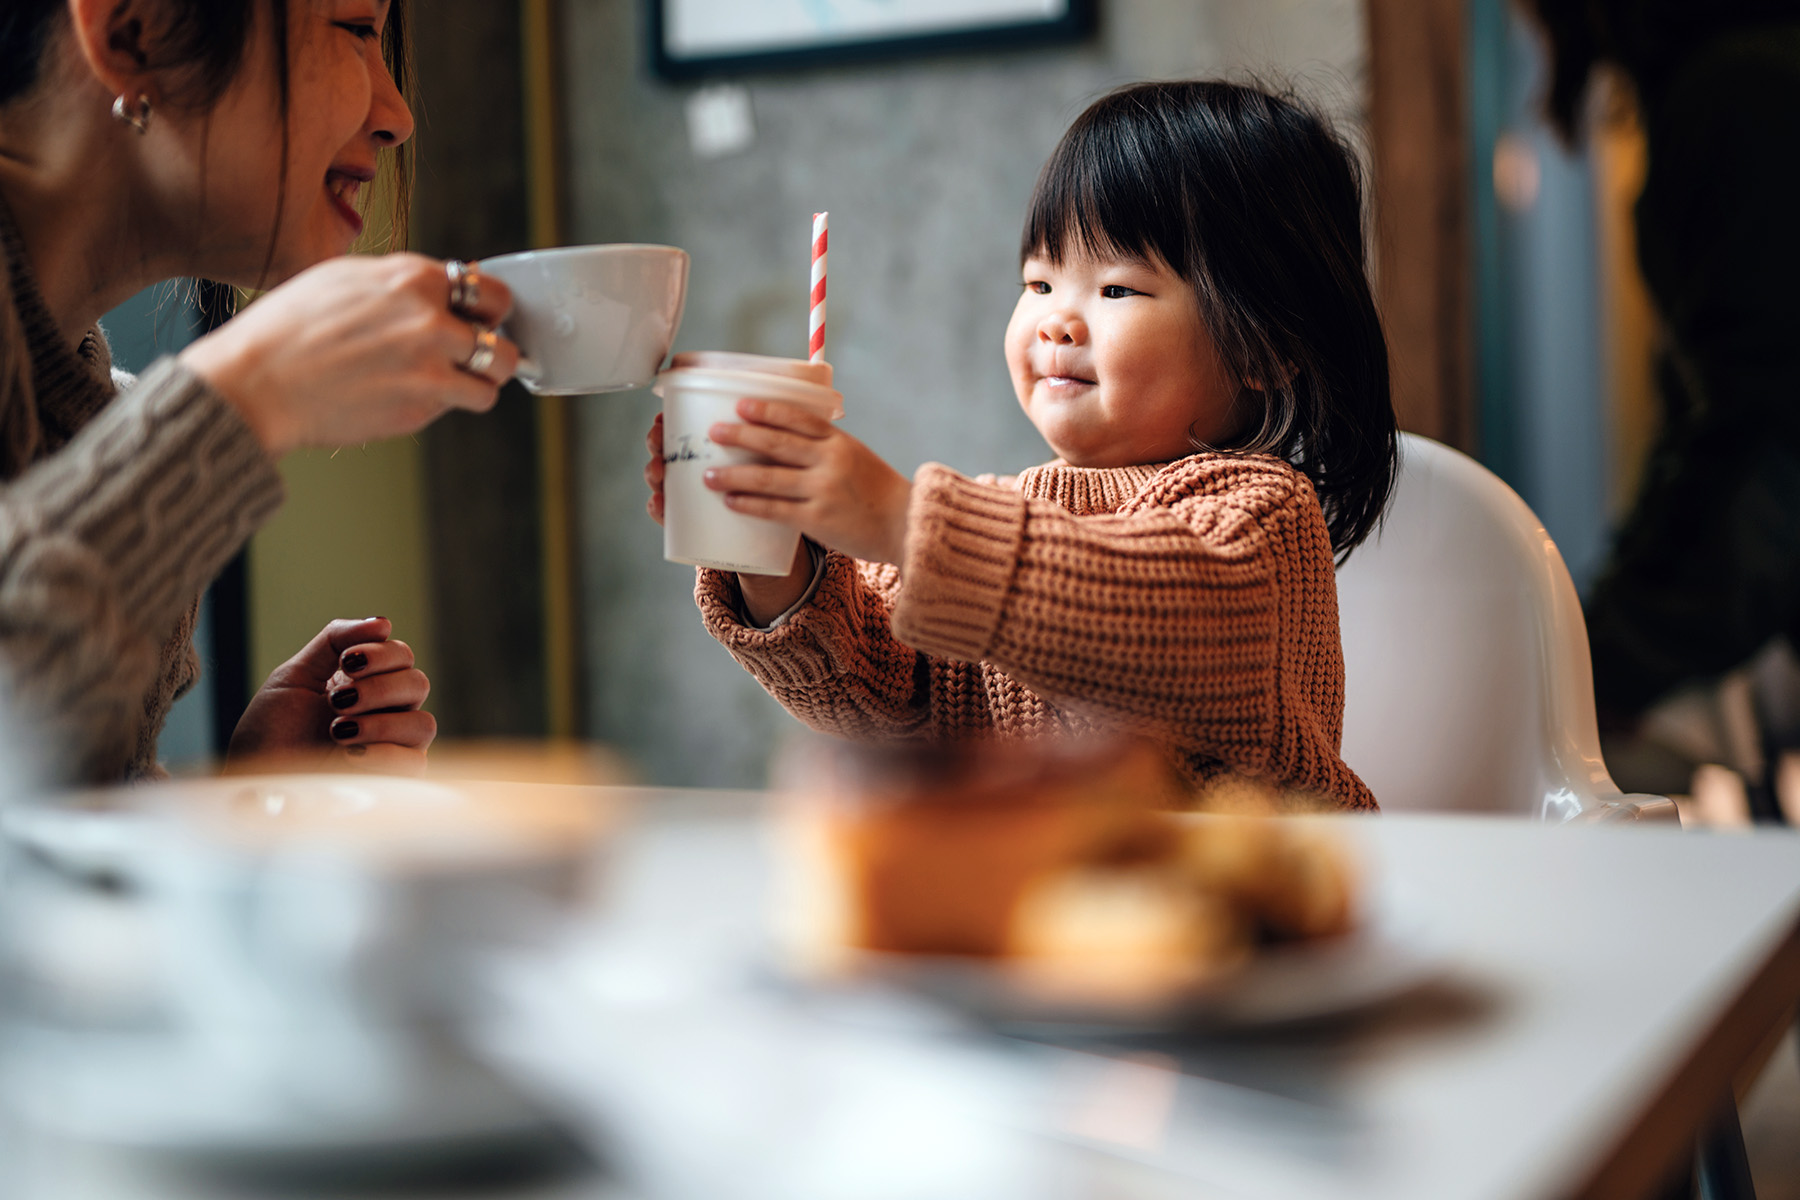 Toddler daughter is cheersing her mother's cup of coffee at a cafe.